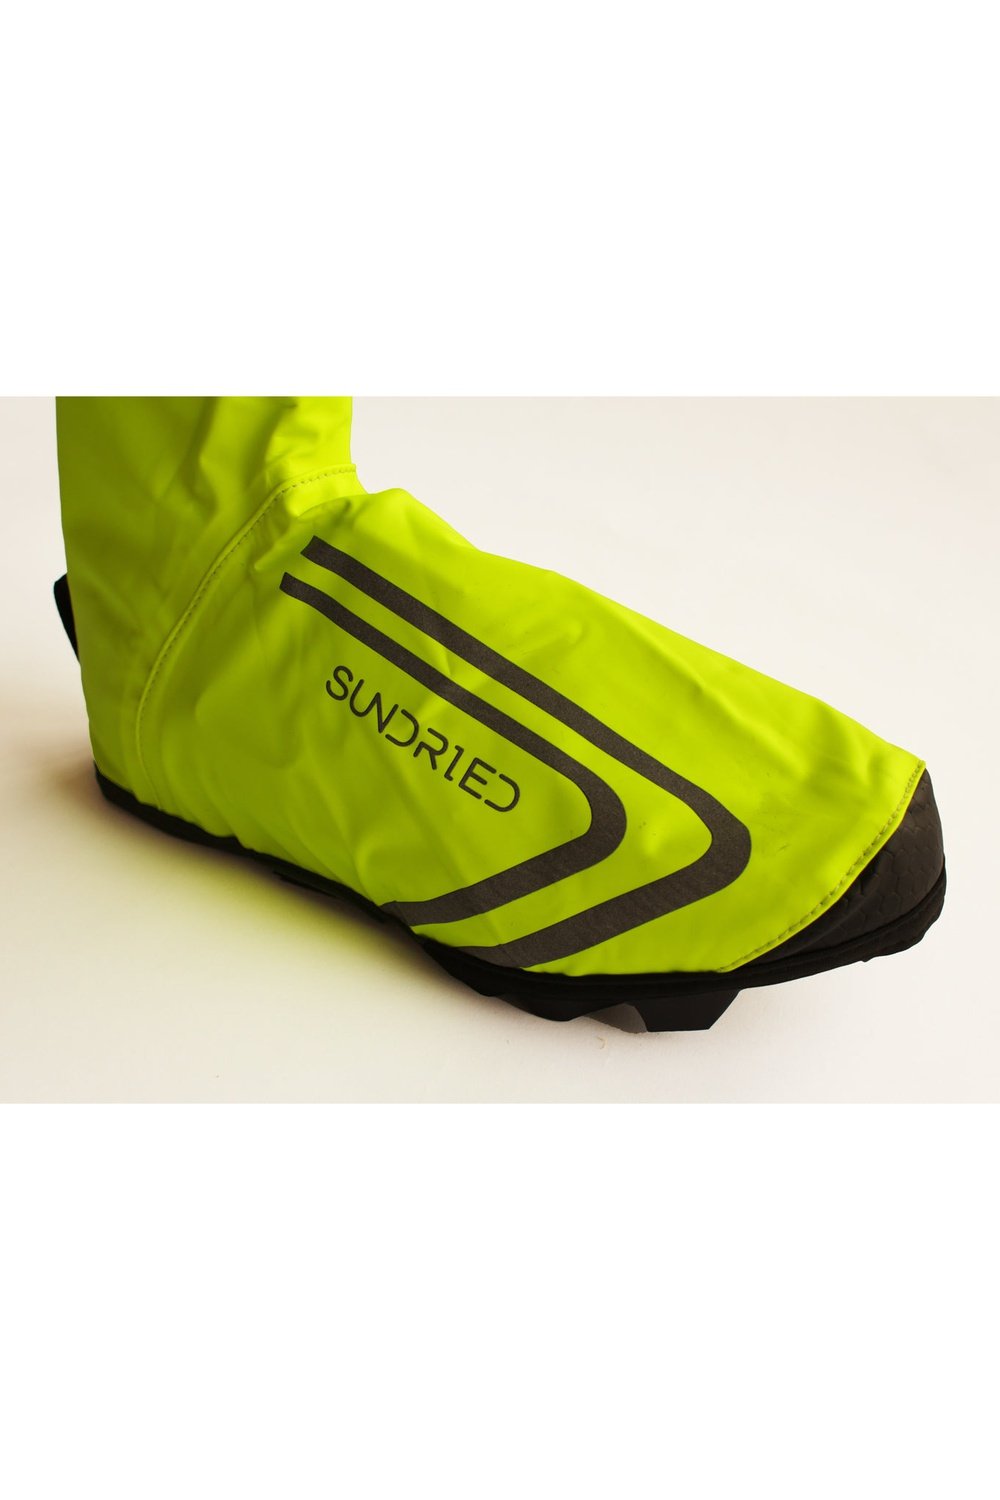 Sundried LD2 Lightweight Cycle Shoe Covers Cover Activewear